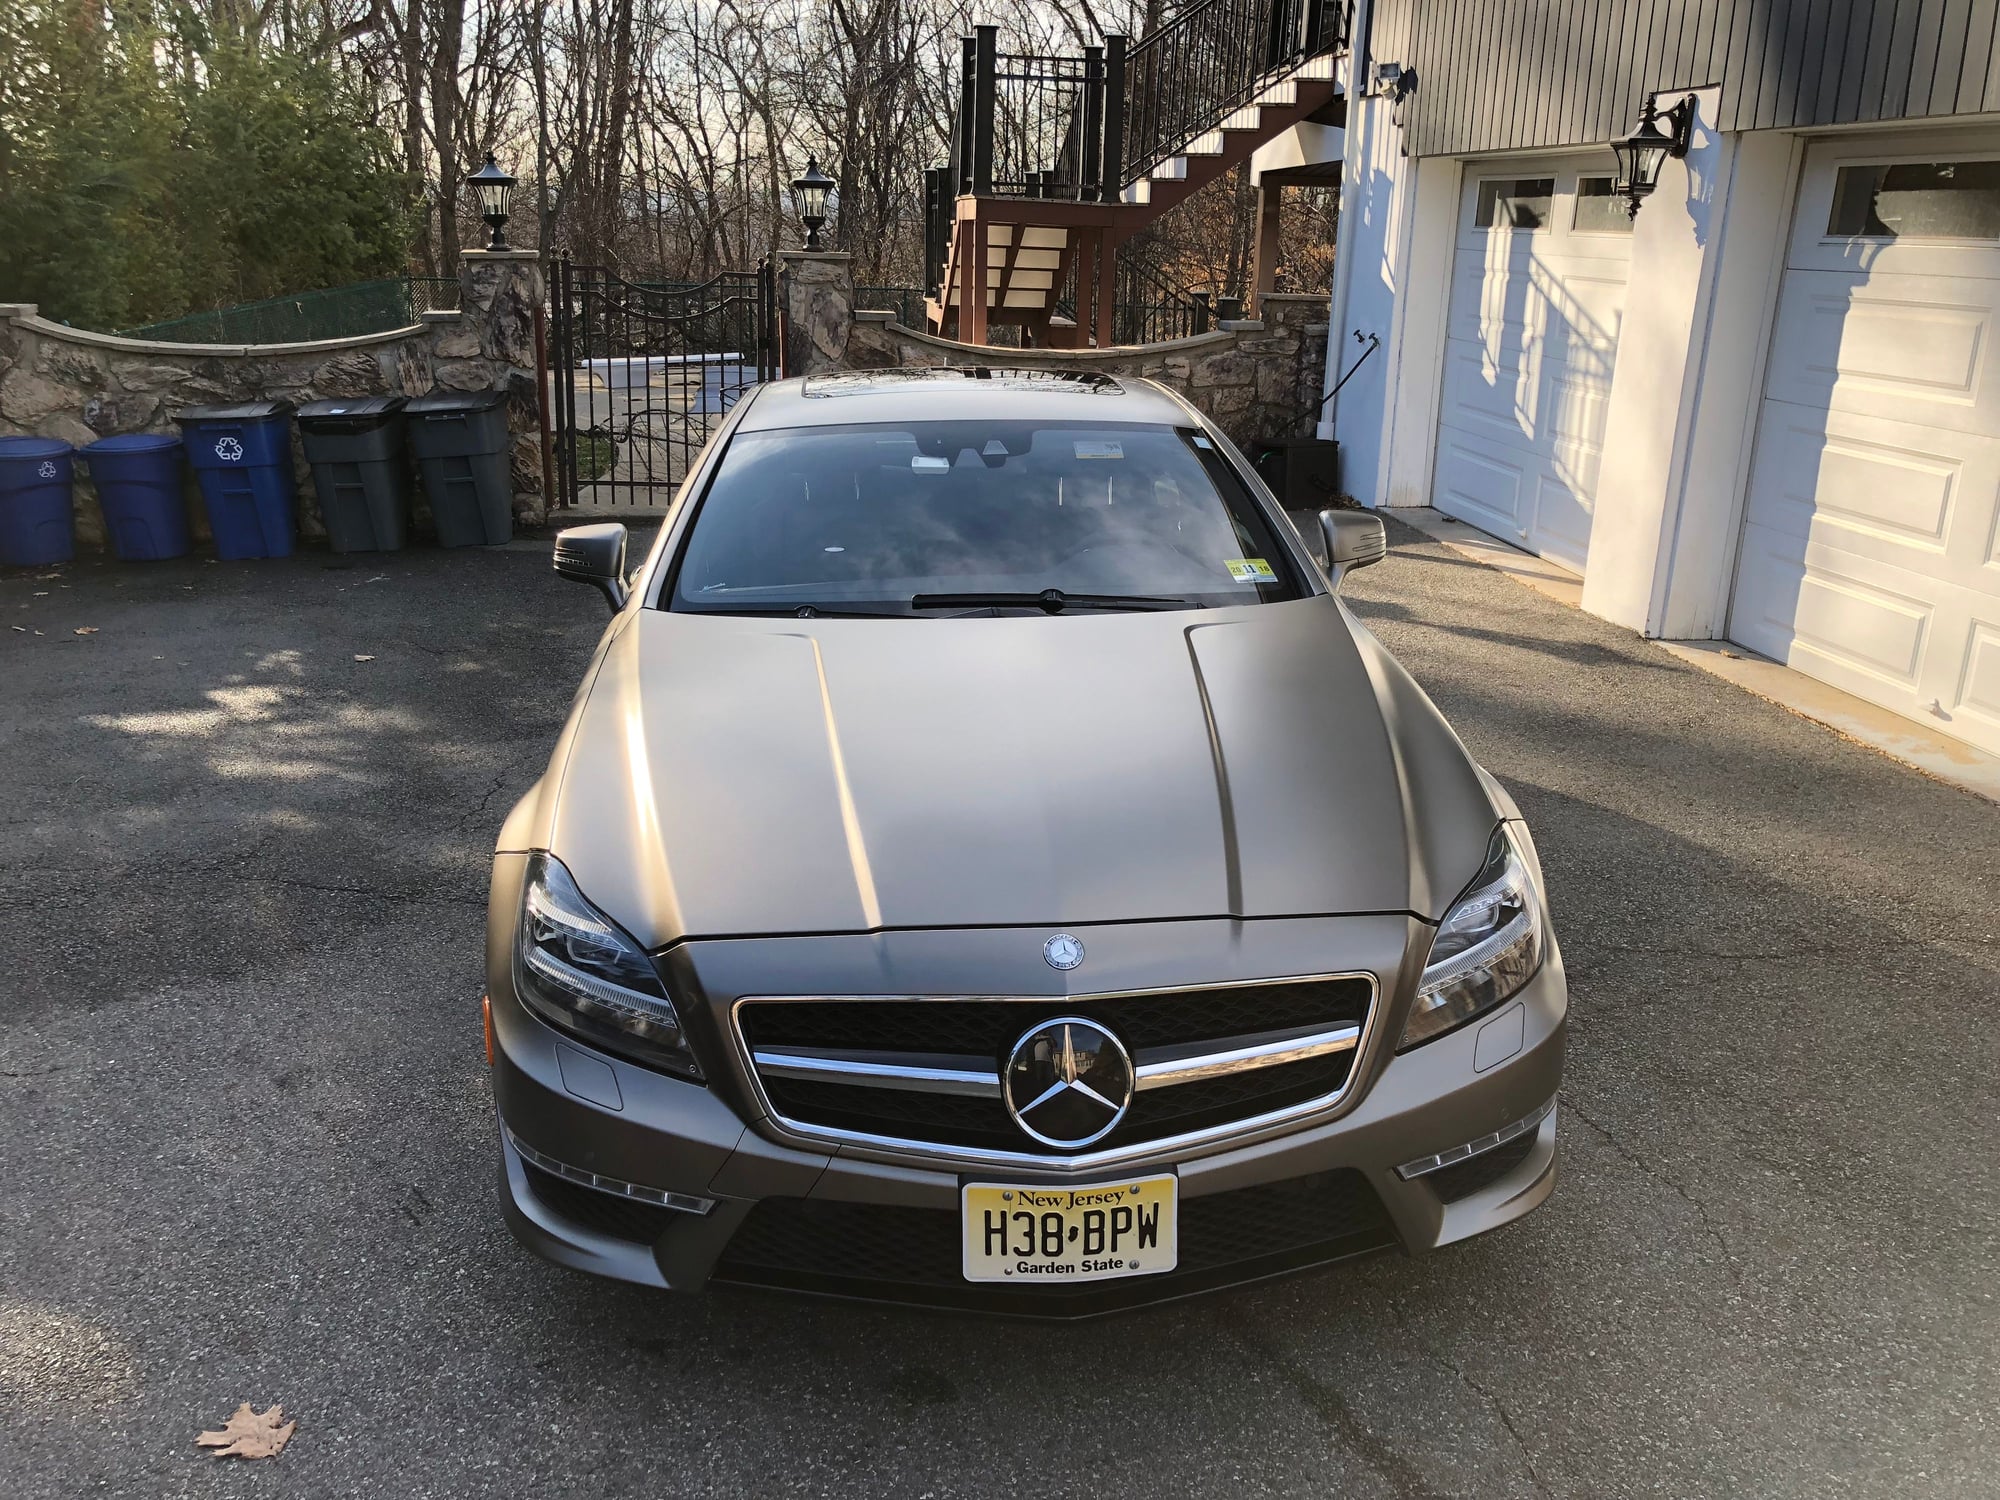 2012 Mercedes-Benz CLS63 AMG - 2012 CLS63 Launch Edition for sale - Used - VIN WDDLJ7EB0CA030598 - 42,800 Miles - 8 cyl - 2WD - Automatic - Coupe - Other - Woodland Park, NJ 07424, United States